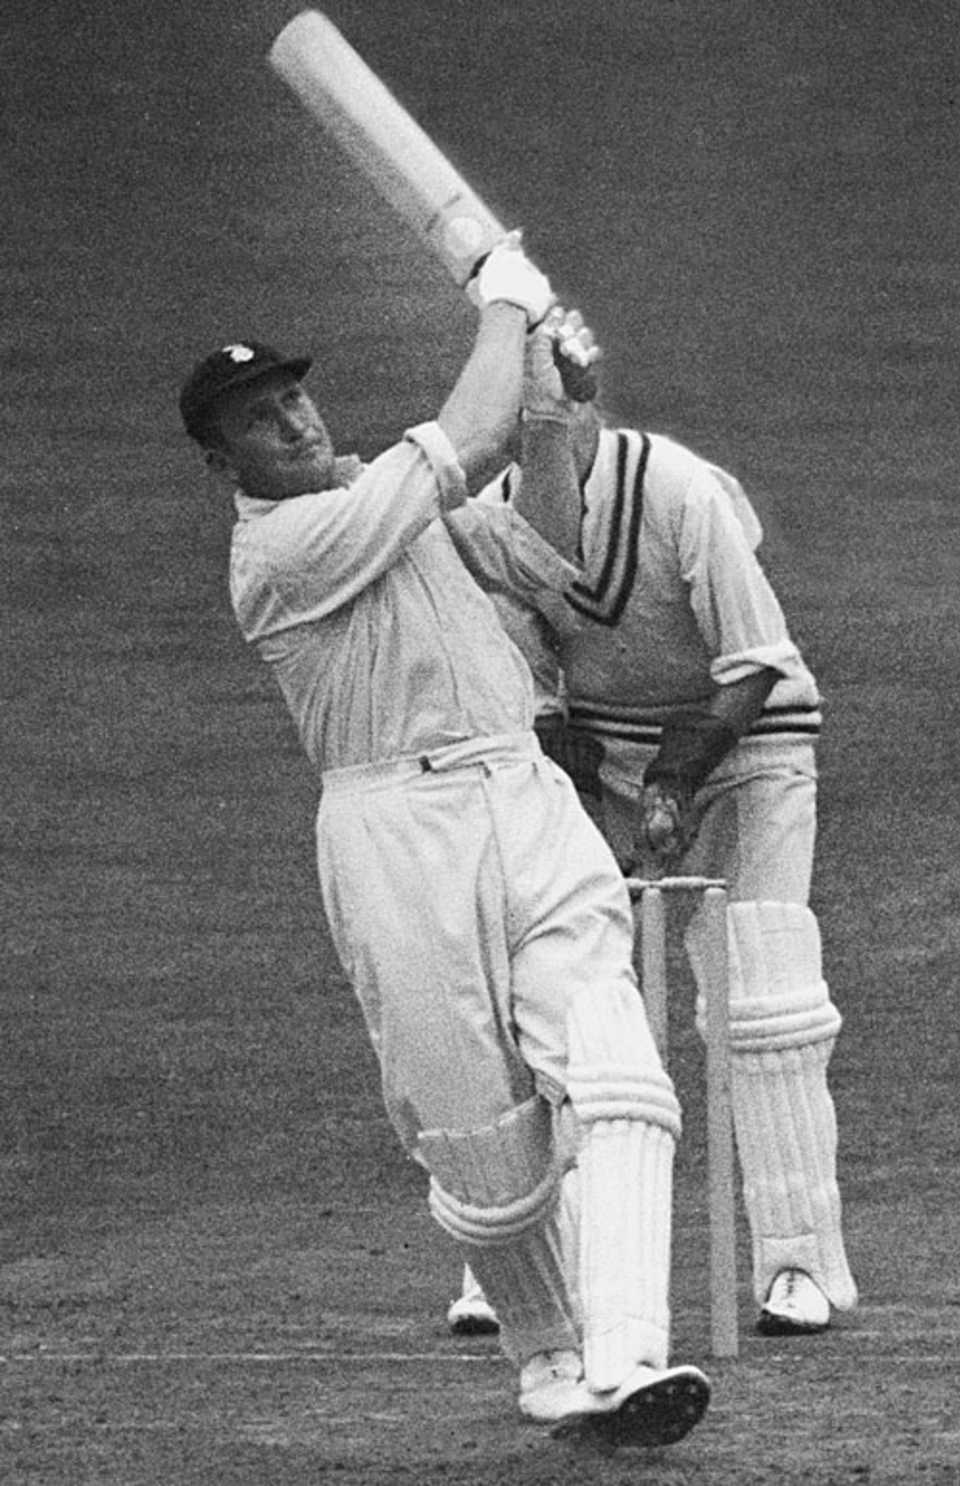 Jim Laker attacks in his innings of 81, Surrey v Hampshire, County Championship, The Oval, 1st day, August 5, 1953